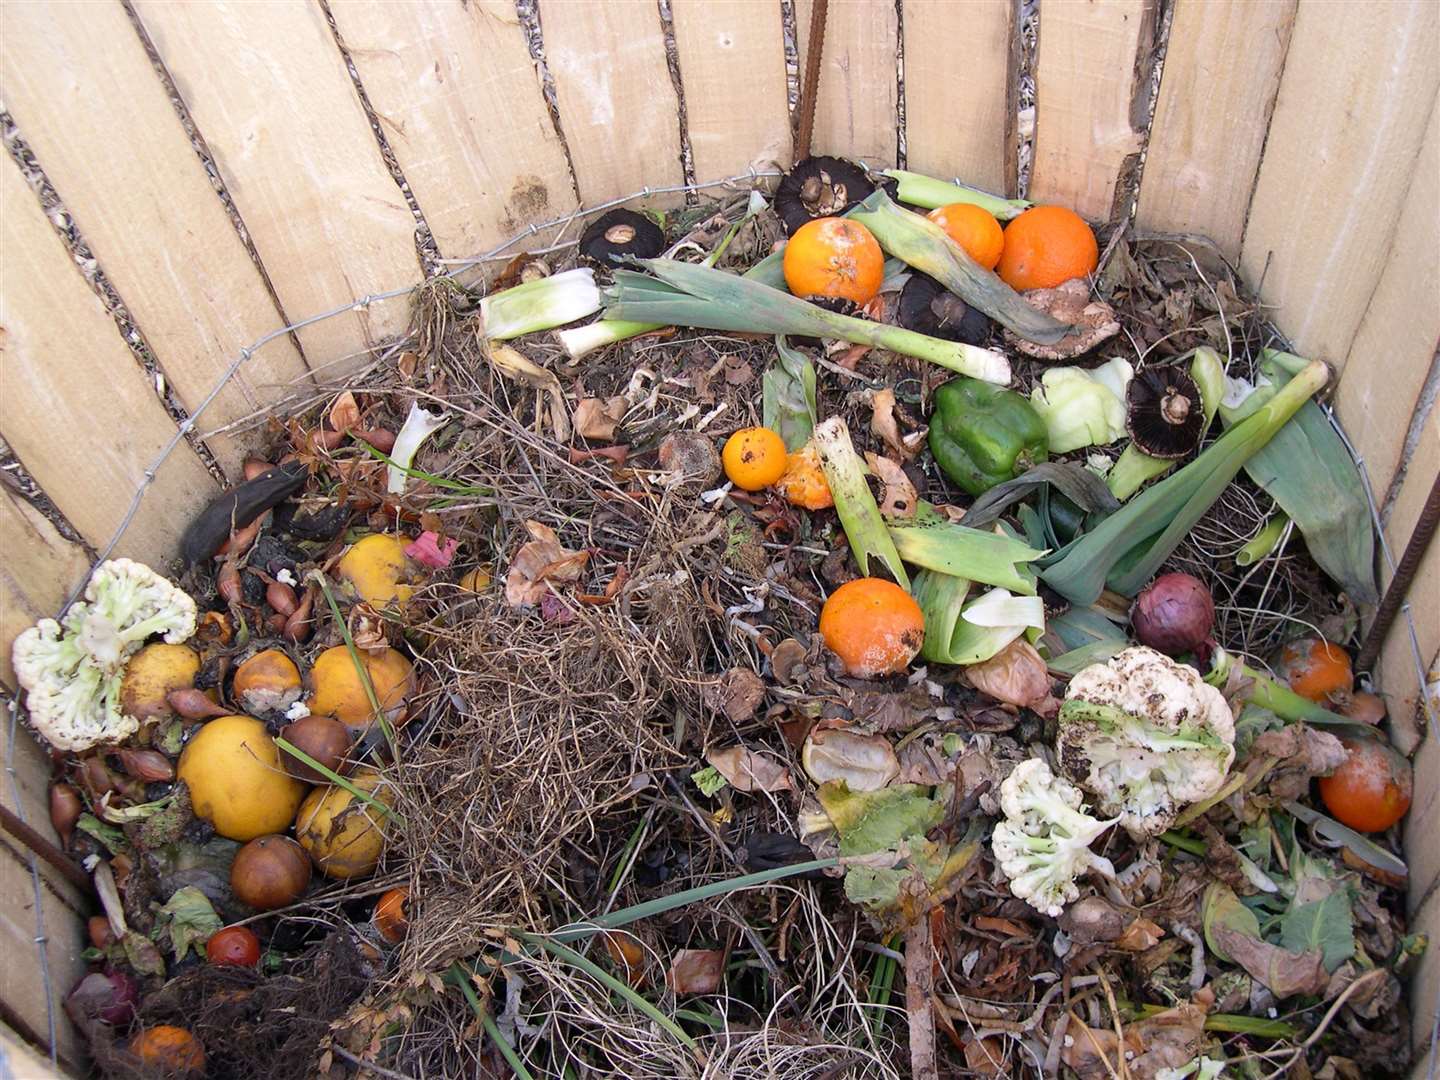 Food waste in a compost bin. Picture: Garden Organic/PA.